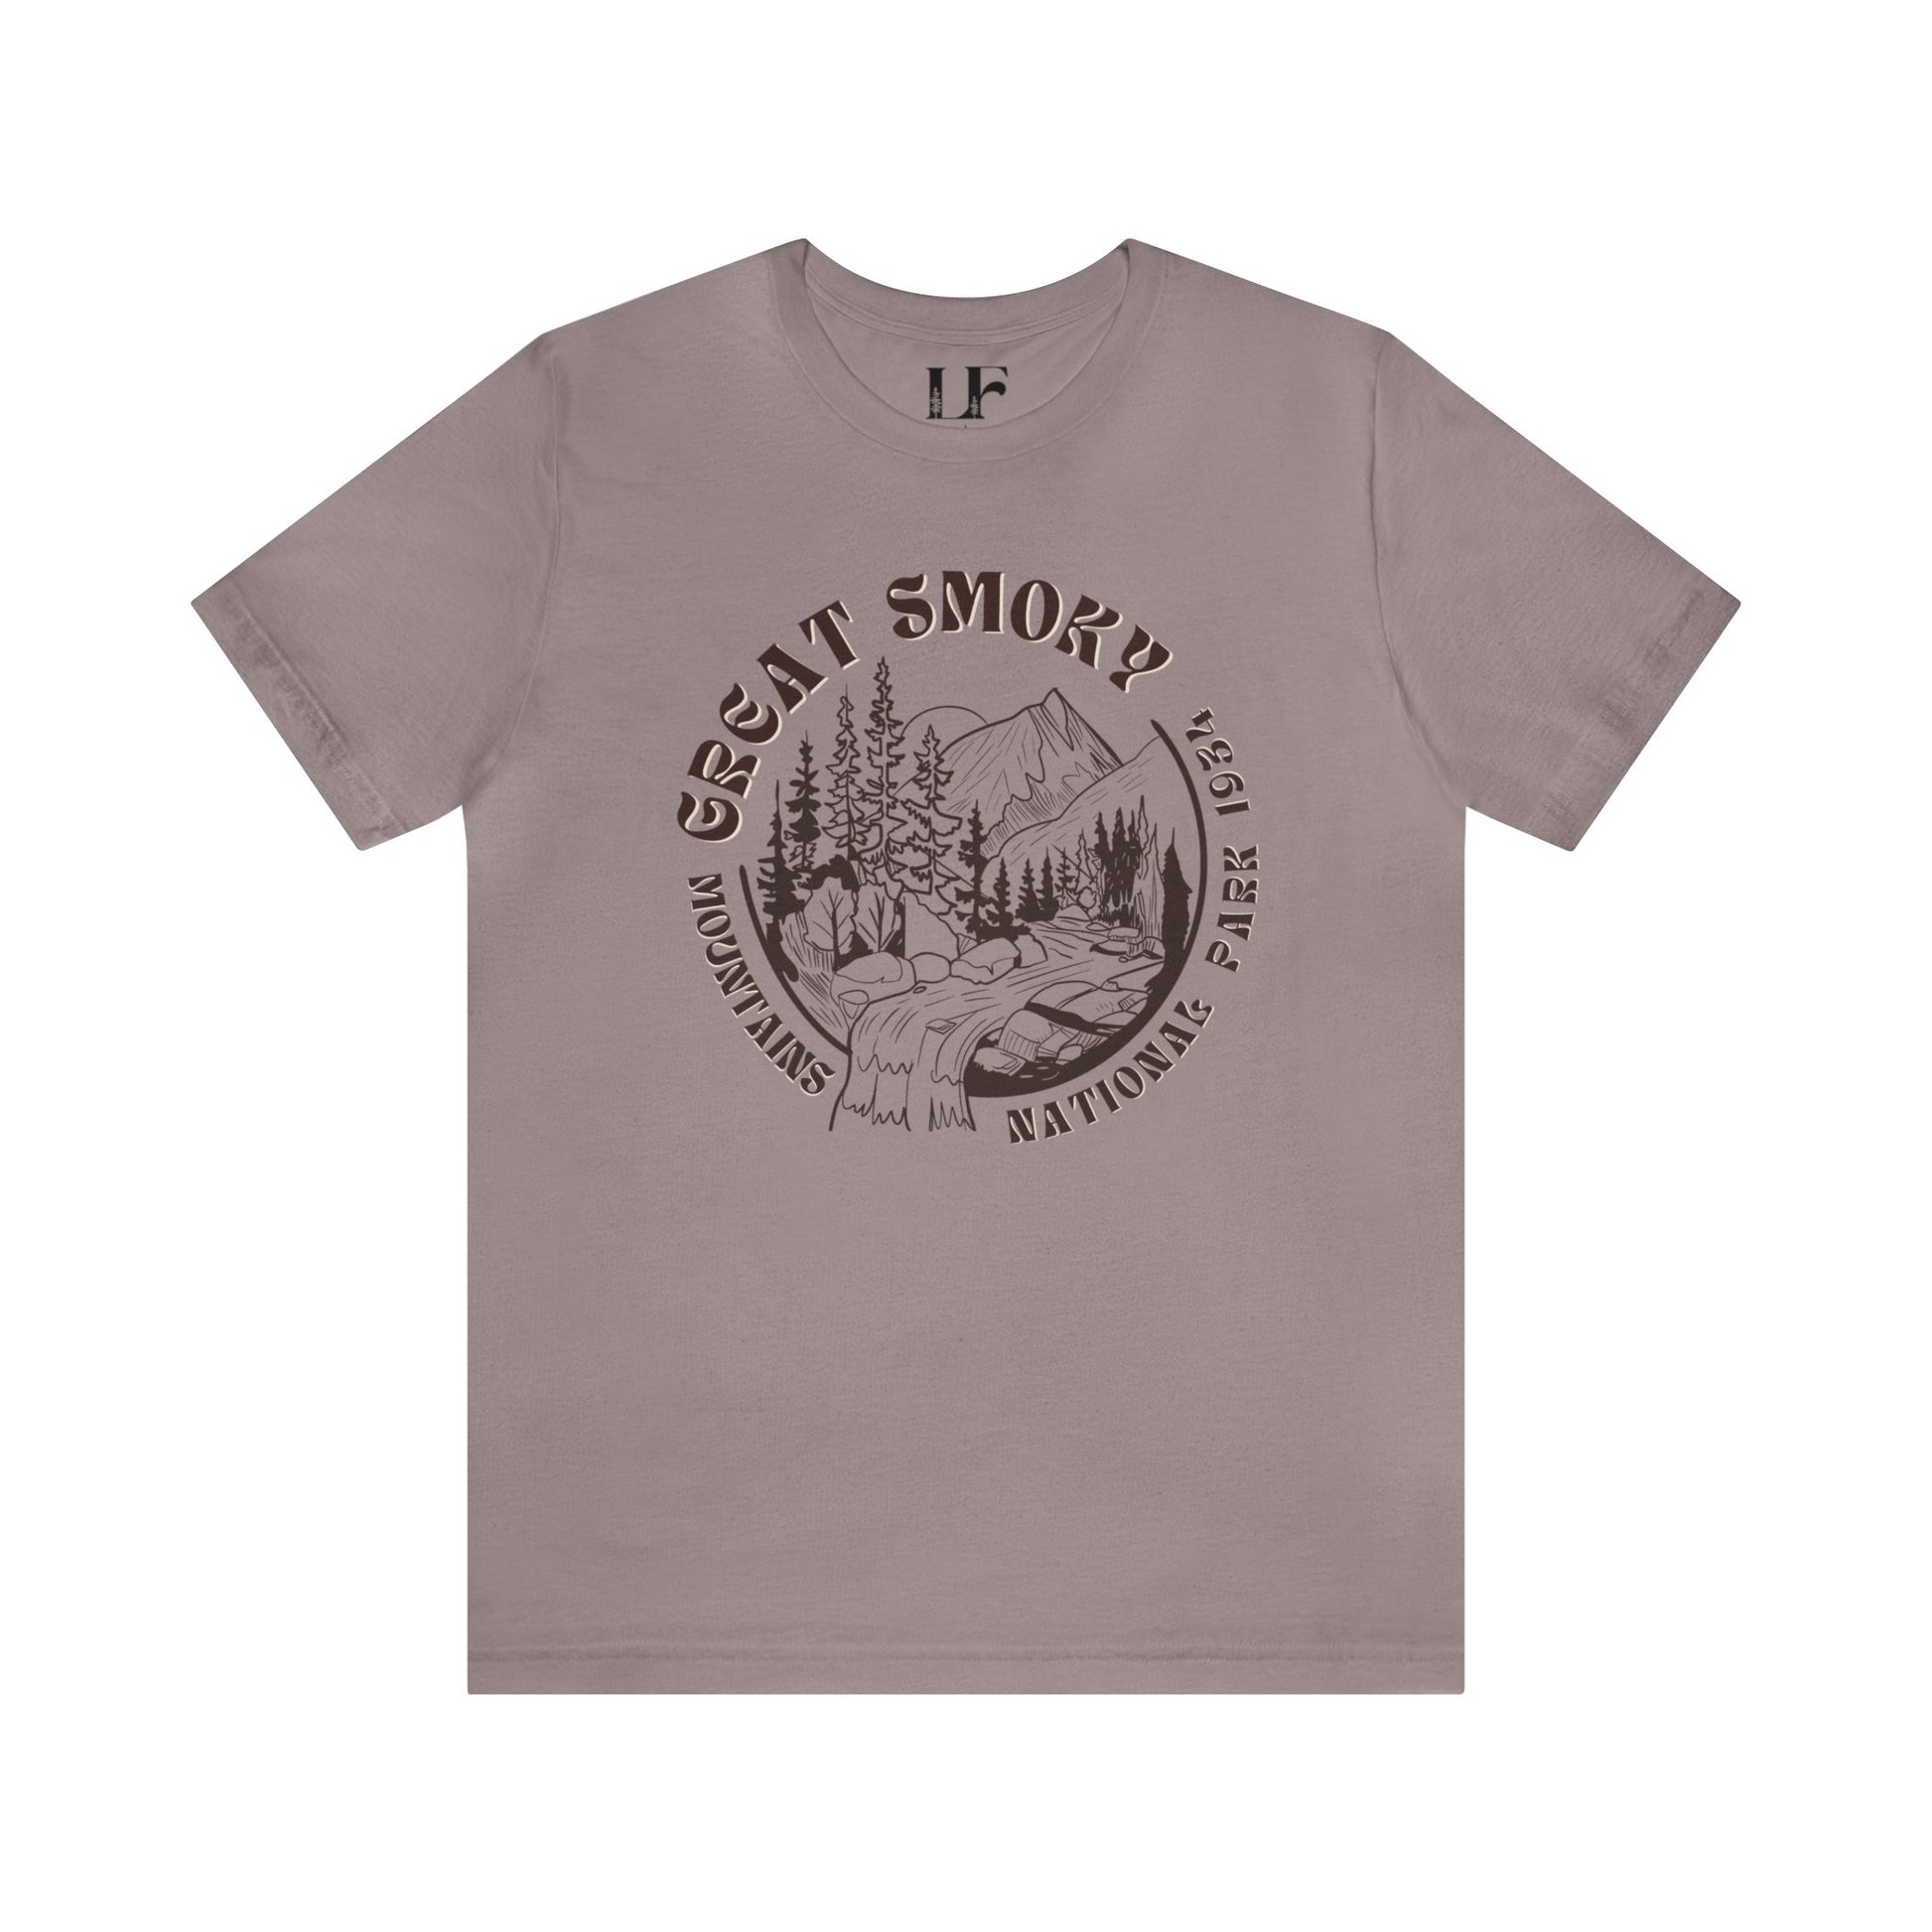 Great Smoky Mountains National Park ShirtBring the wilderness of Great Smoky Mountains National Park and Tennessee style into your wardrobe with this vintage styled boyfriend t-shirt inspired by the natural